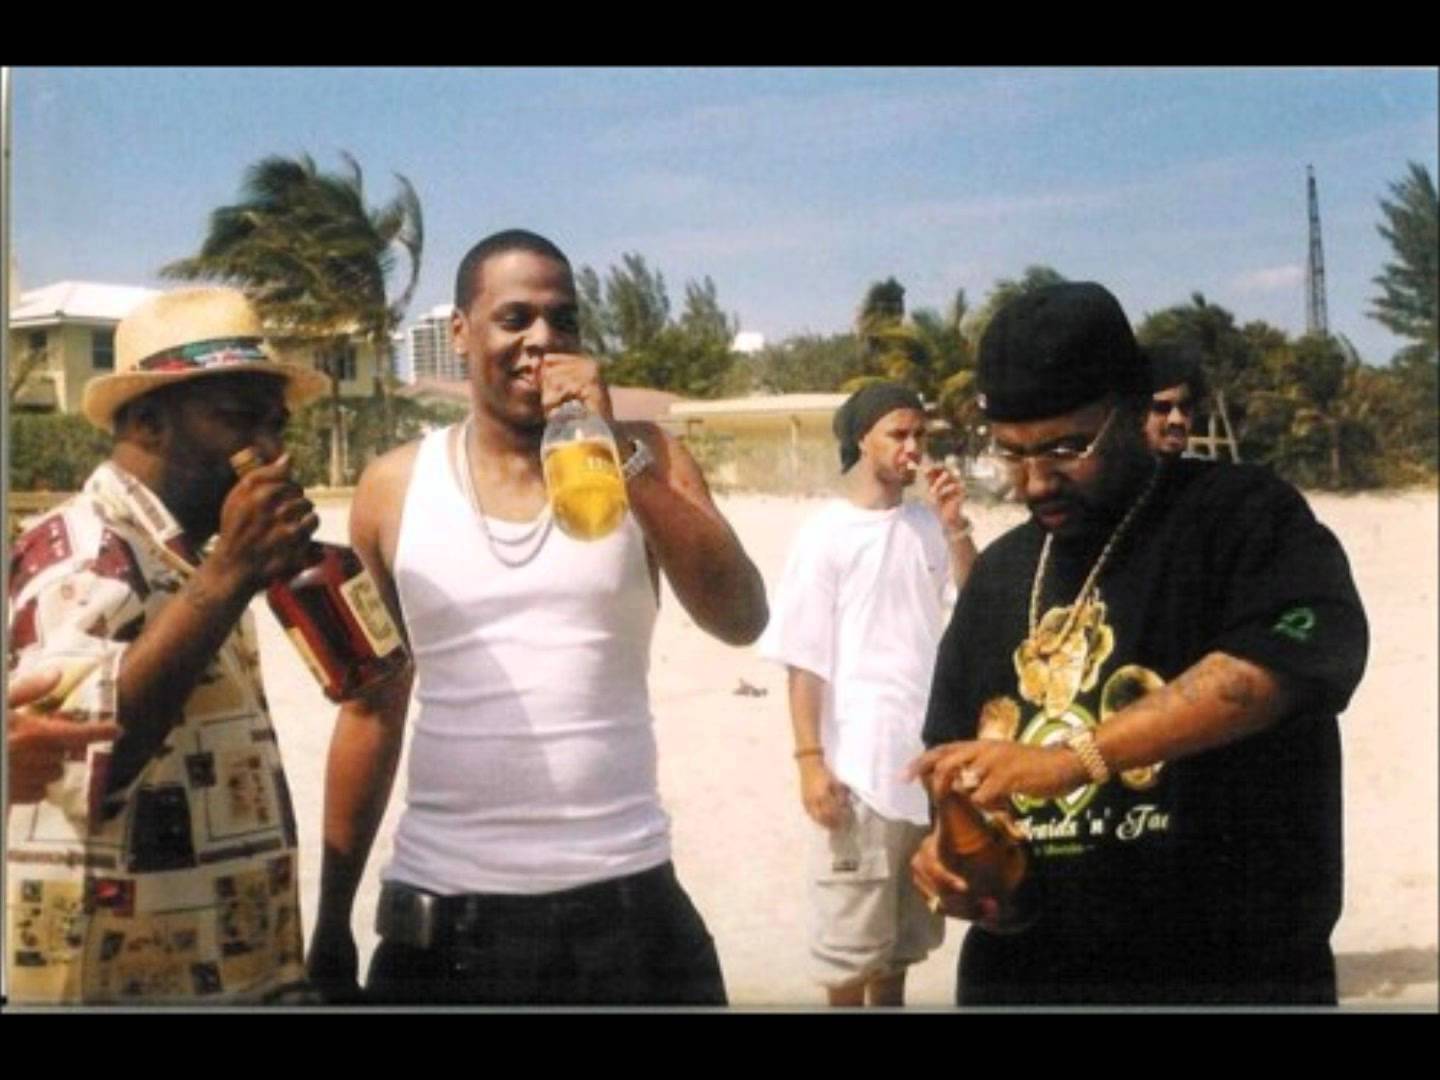 Throwback Rap Video of the Day: JAY-Z - Big Pimpin' feat. UGK